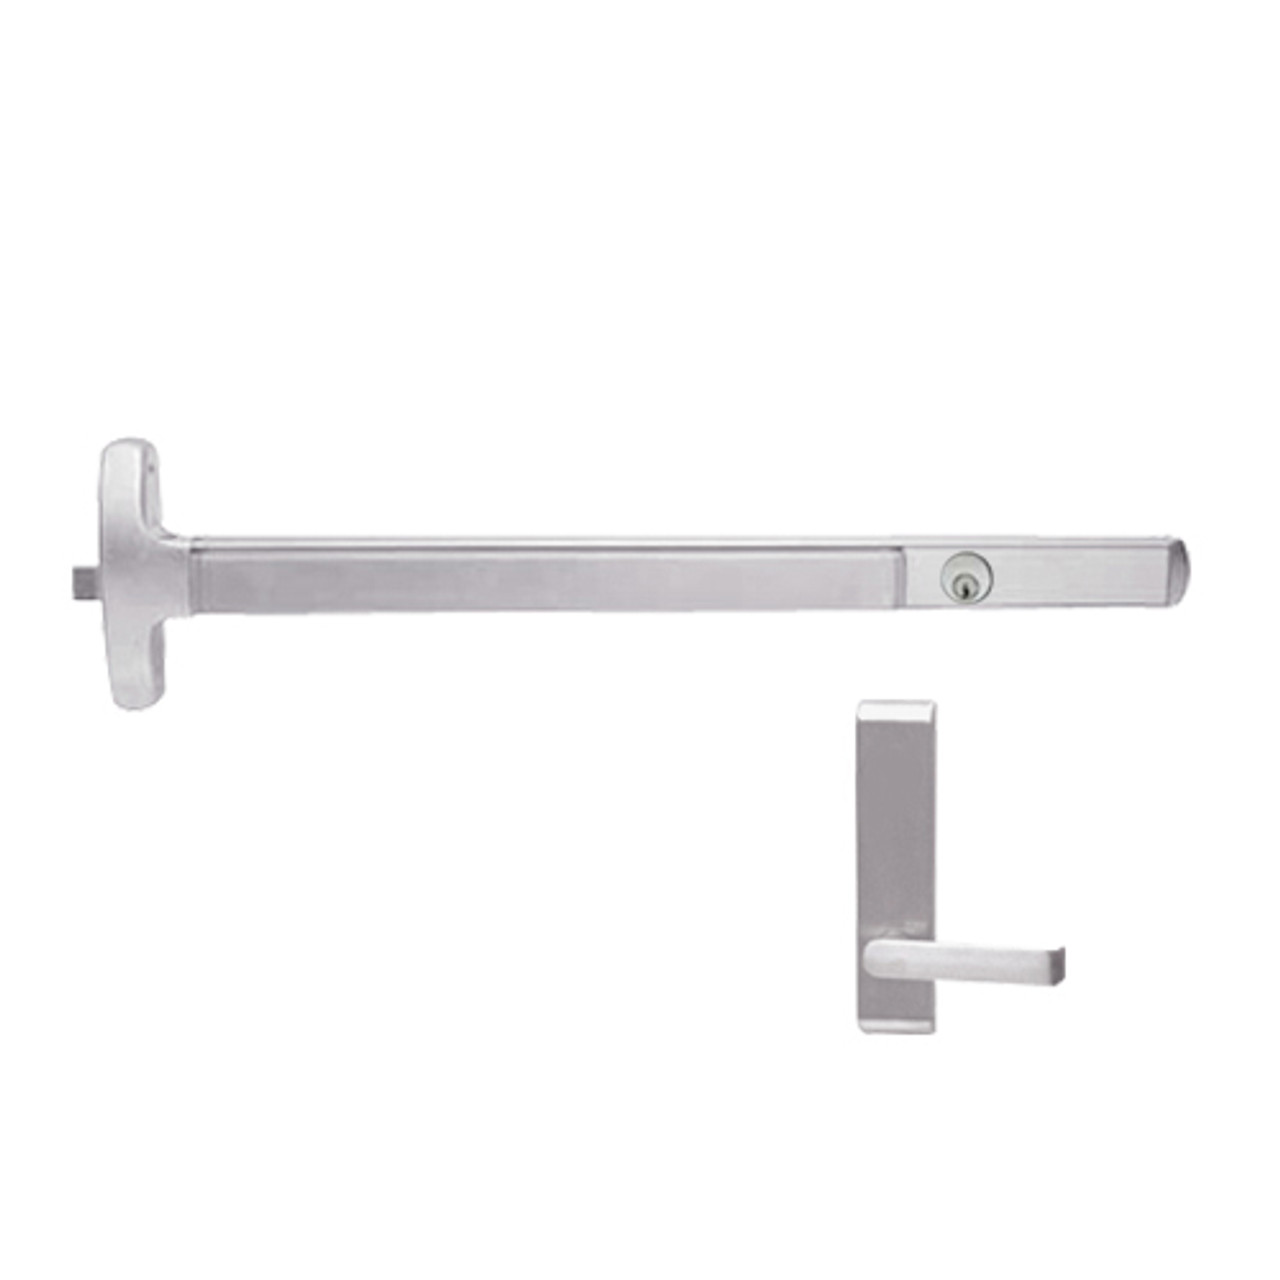 CD24-R-L-DT-DANE-US32-4-LHR Falcon Exit Device in Polished Stainless Steel